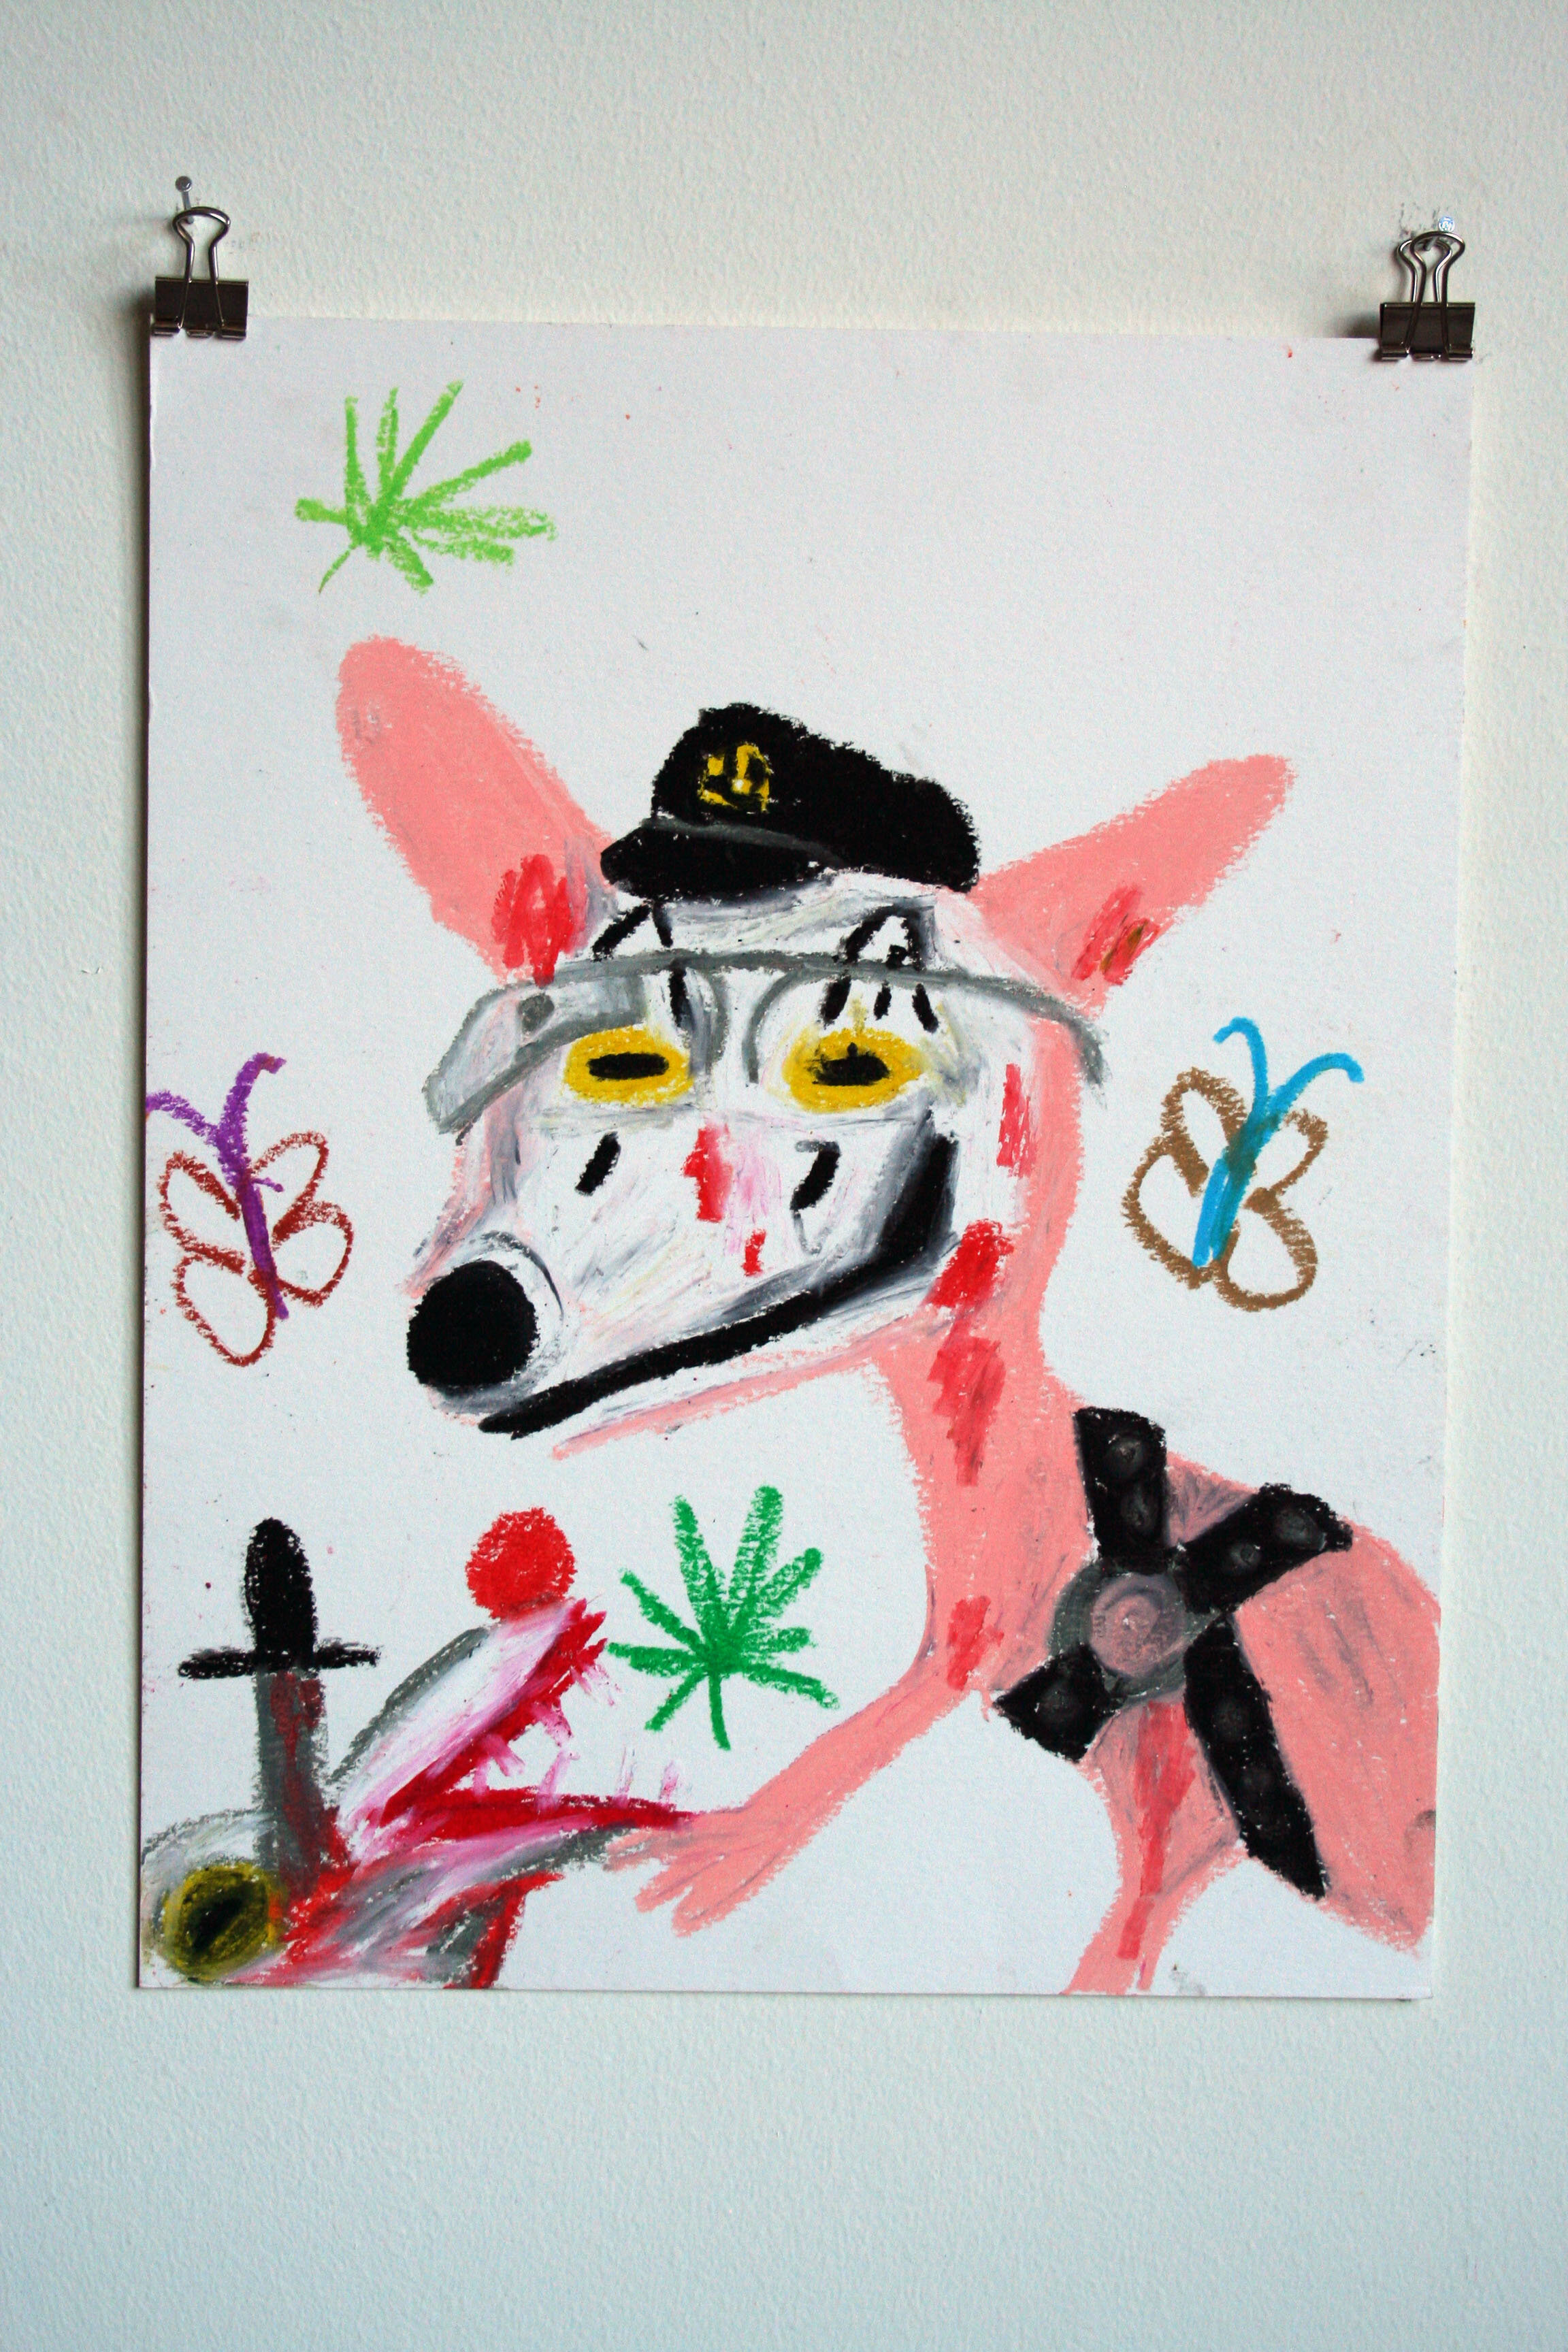   Pleather Puppy In Google Glass (Whoop Whoop),  2013  14 x 11 inches (35.56 x 27.94 cm.)  Oil pastel on paper 